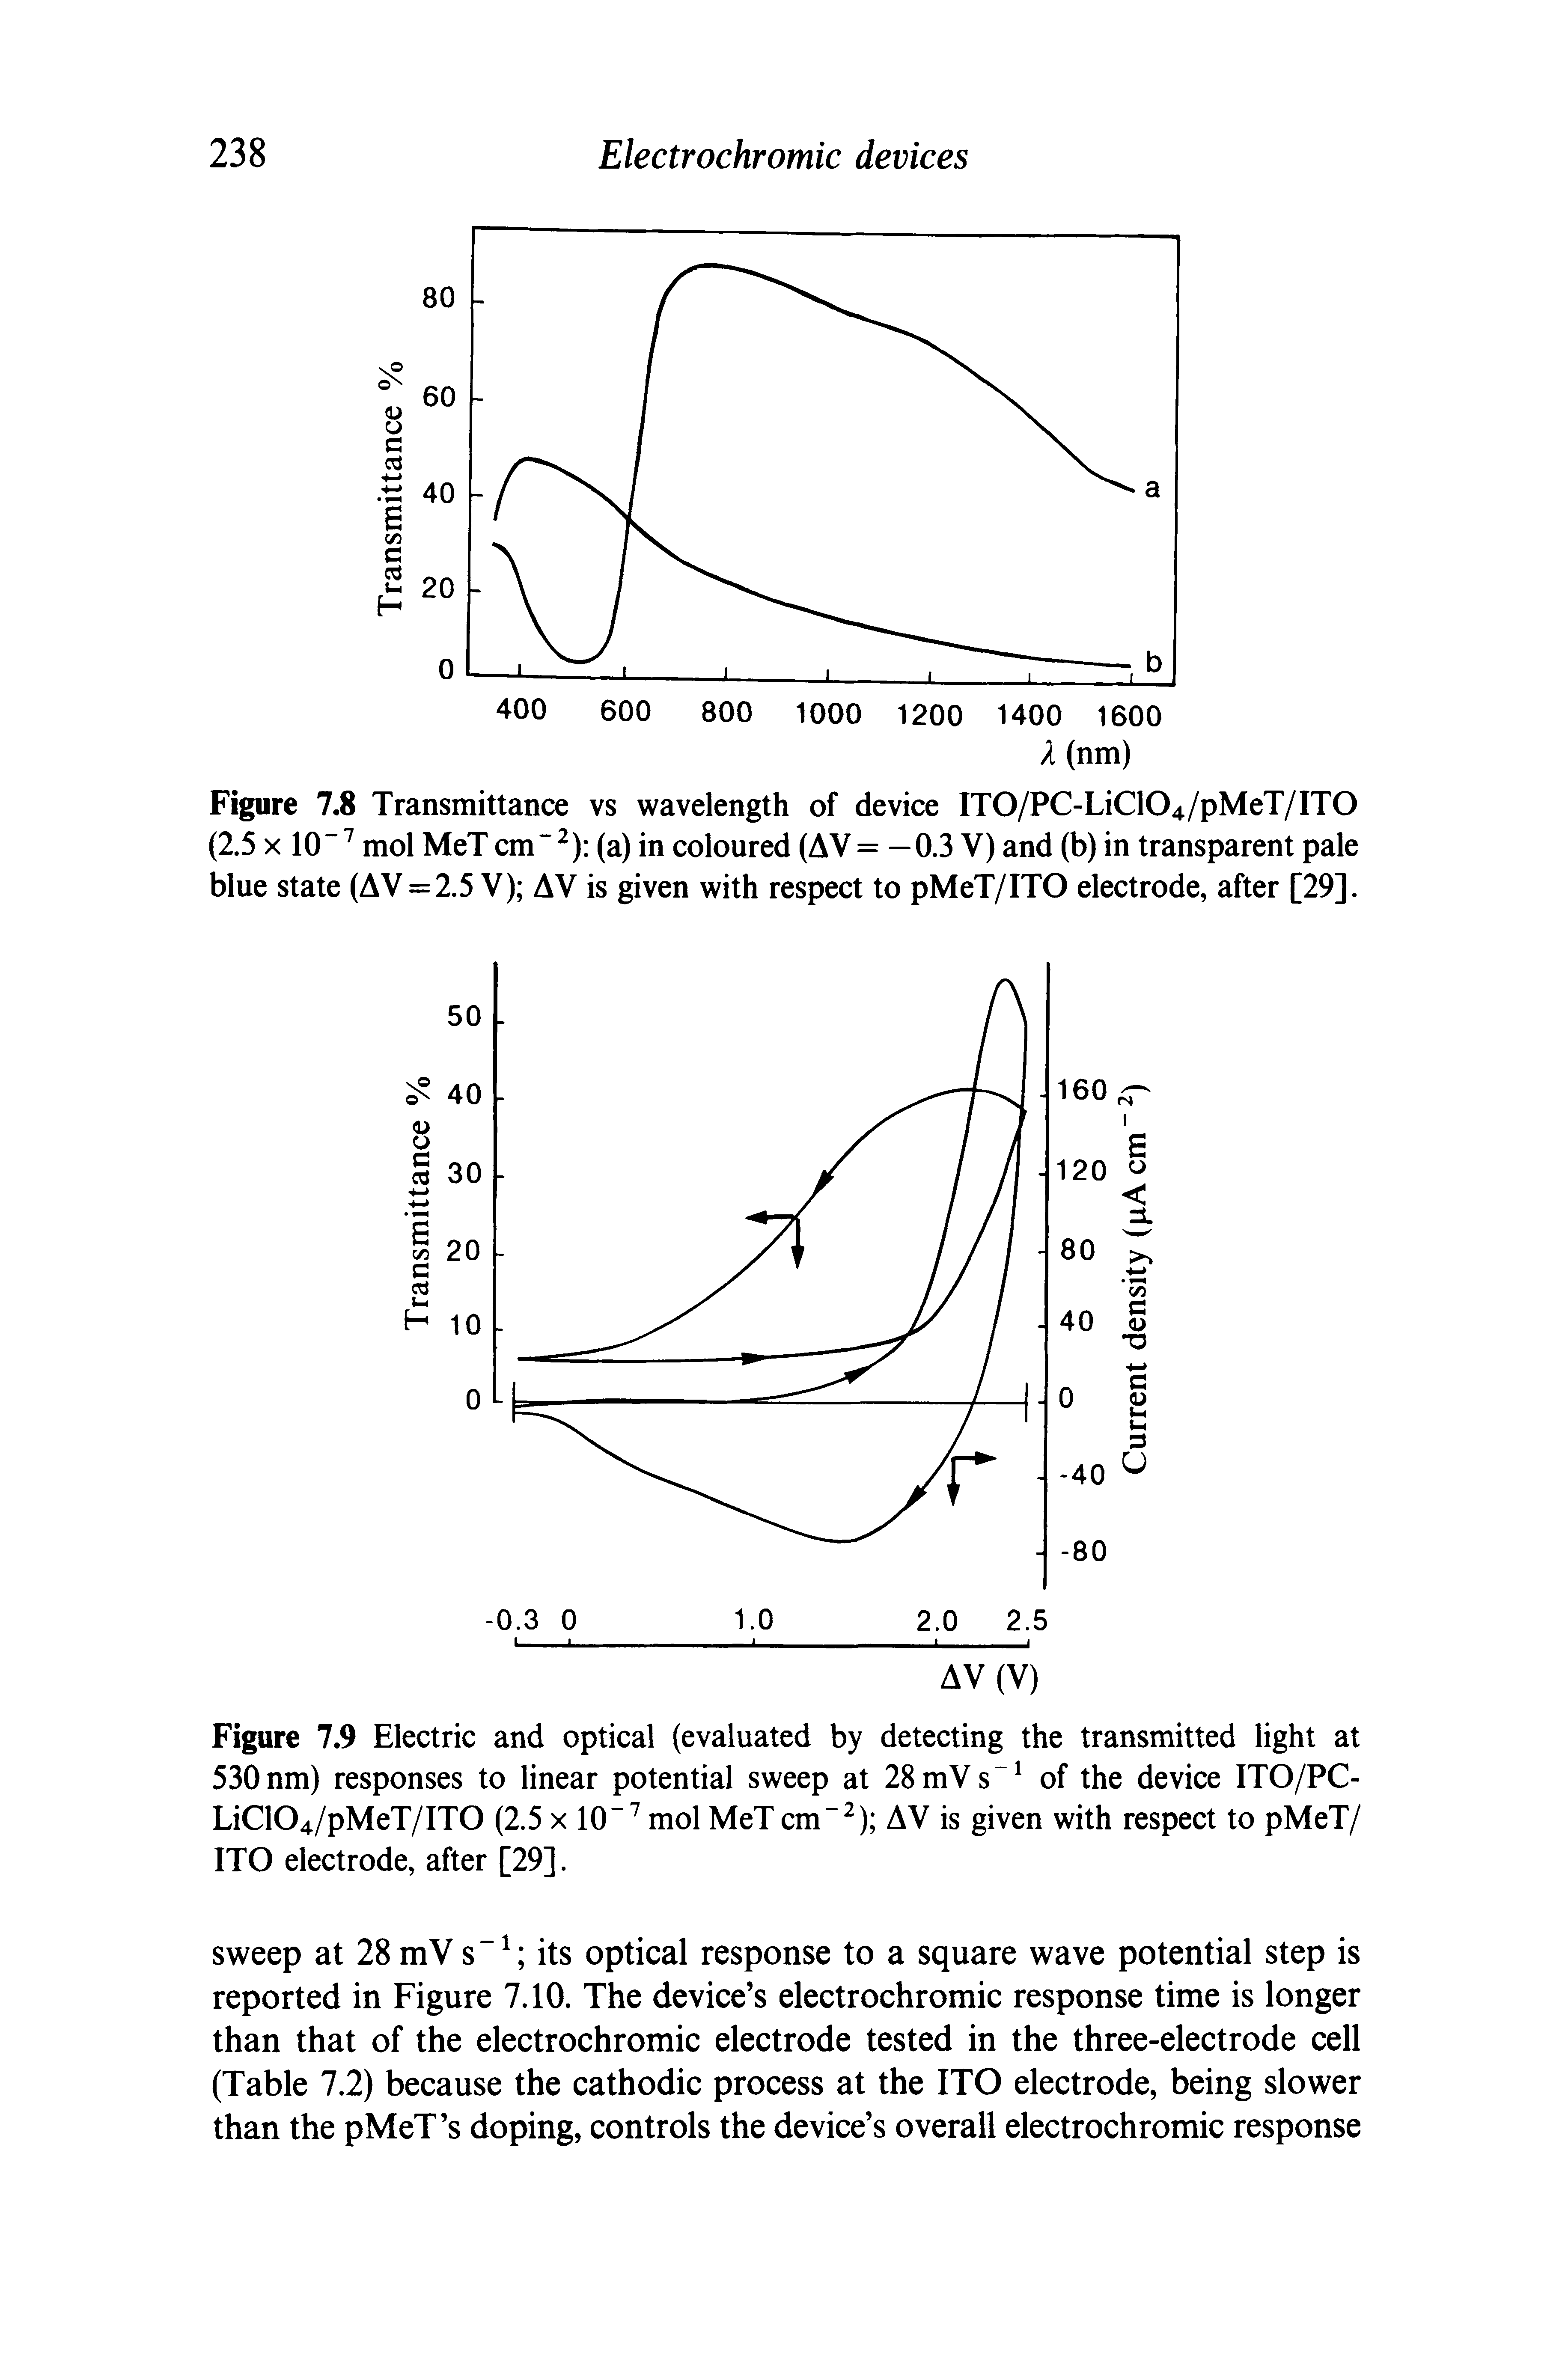 Figure 7.9 Electric and optical (evaluated by detecting the transmitted light at 530nm) responses to linear potential sweep at 28mVs of the device ITO/PC-LiC104/pMeT/ITO (2.5 x mol MeTcm" ) AV is given with respect to pMeT/ ITO electrode, after [29].